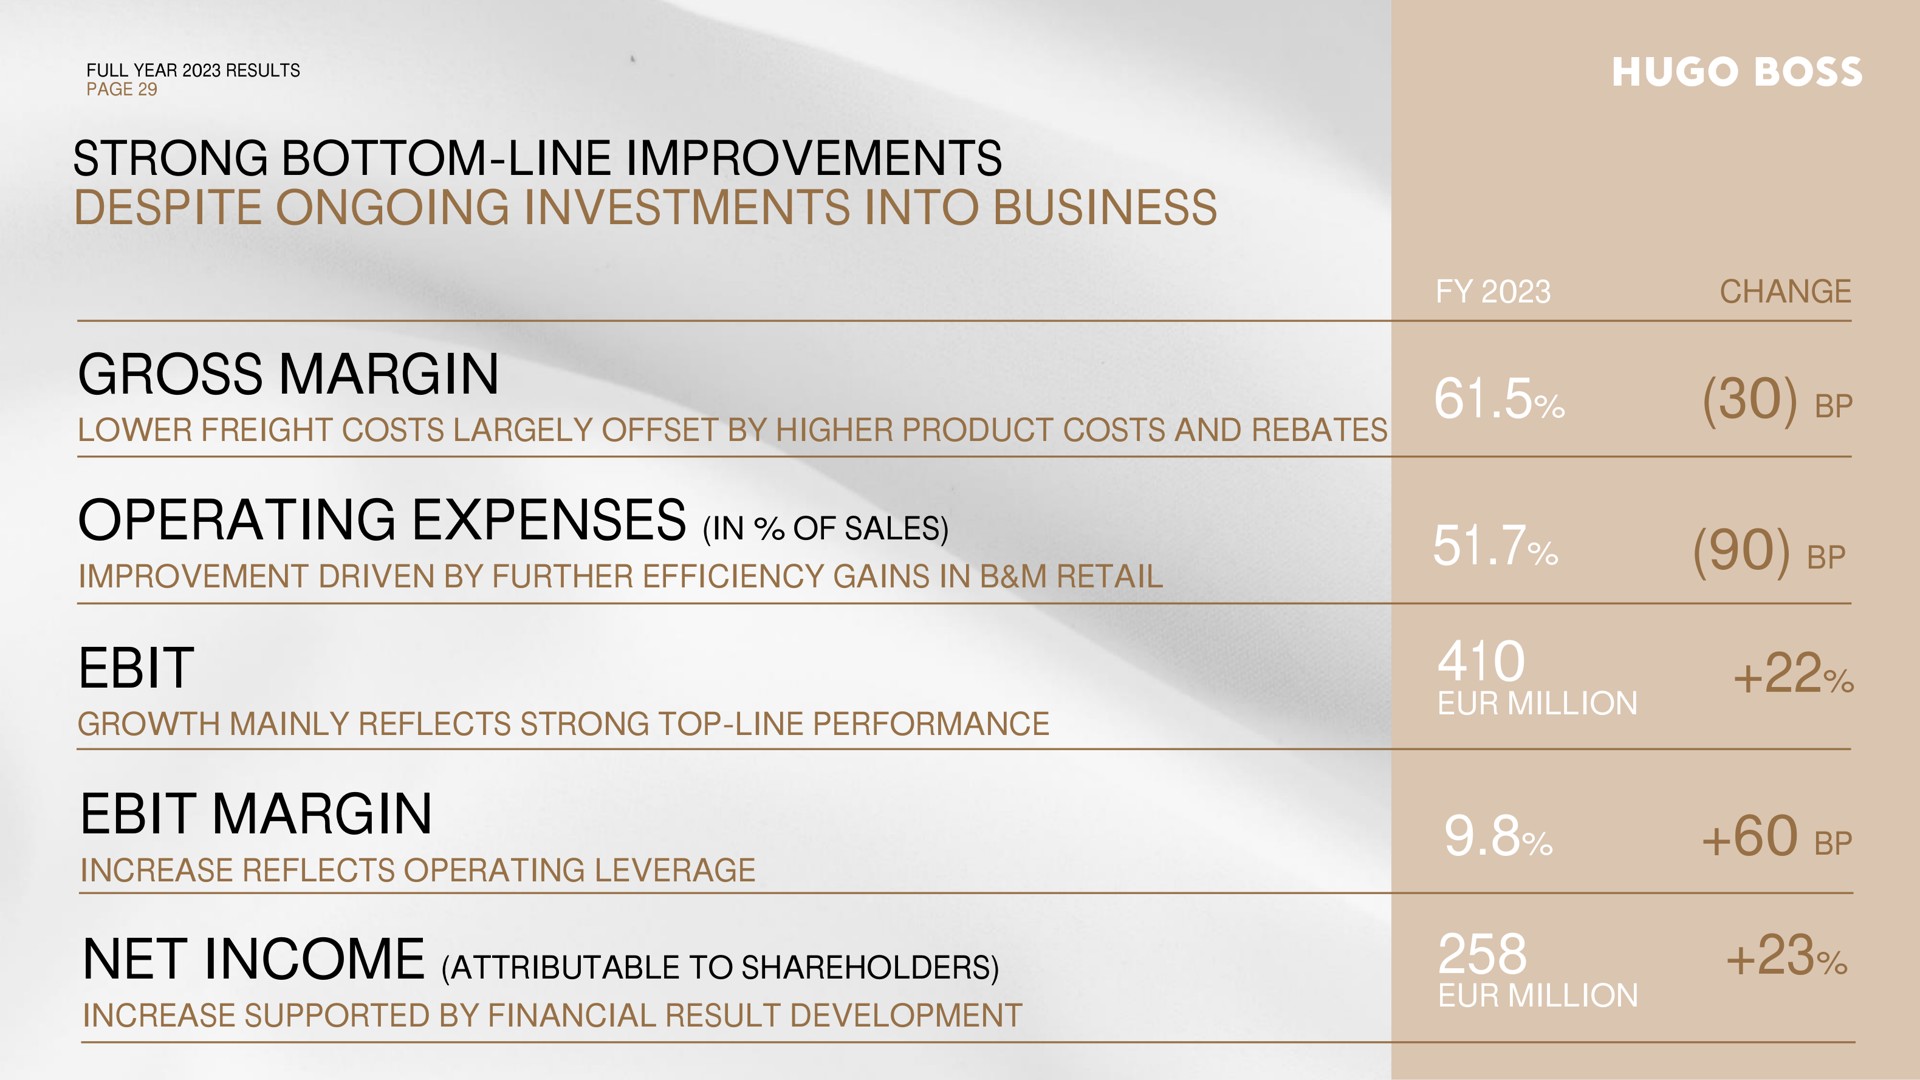 strong bottom line improvements despite ongoing investments into business gross margin lower freight costs largely offset by higher product costs and rebates change operating expenses in of sales improvement driven by further efficiency gains in retail growth mainly reflects strong top line performance margin increase reflects operating leverage net income attributable to shareholders increase supported by financial result development million million sates be | Hugo Boss